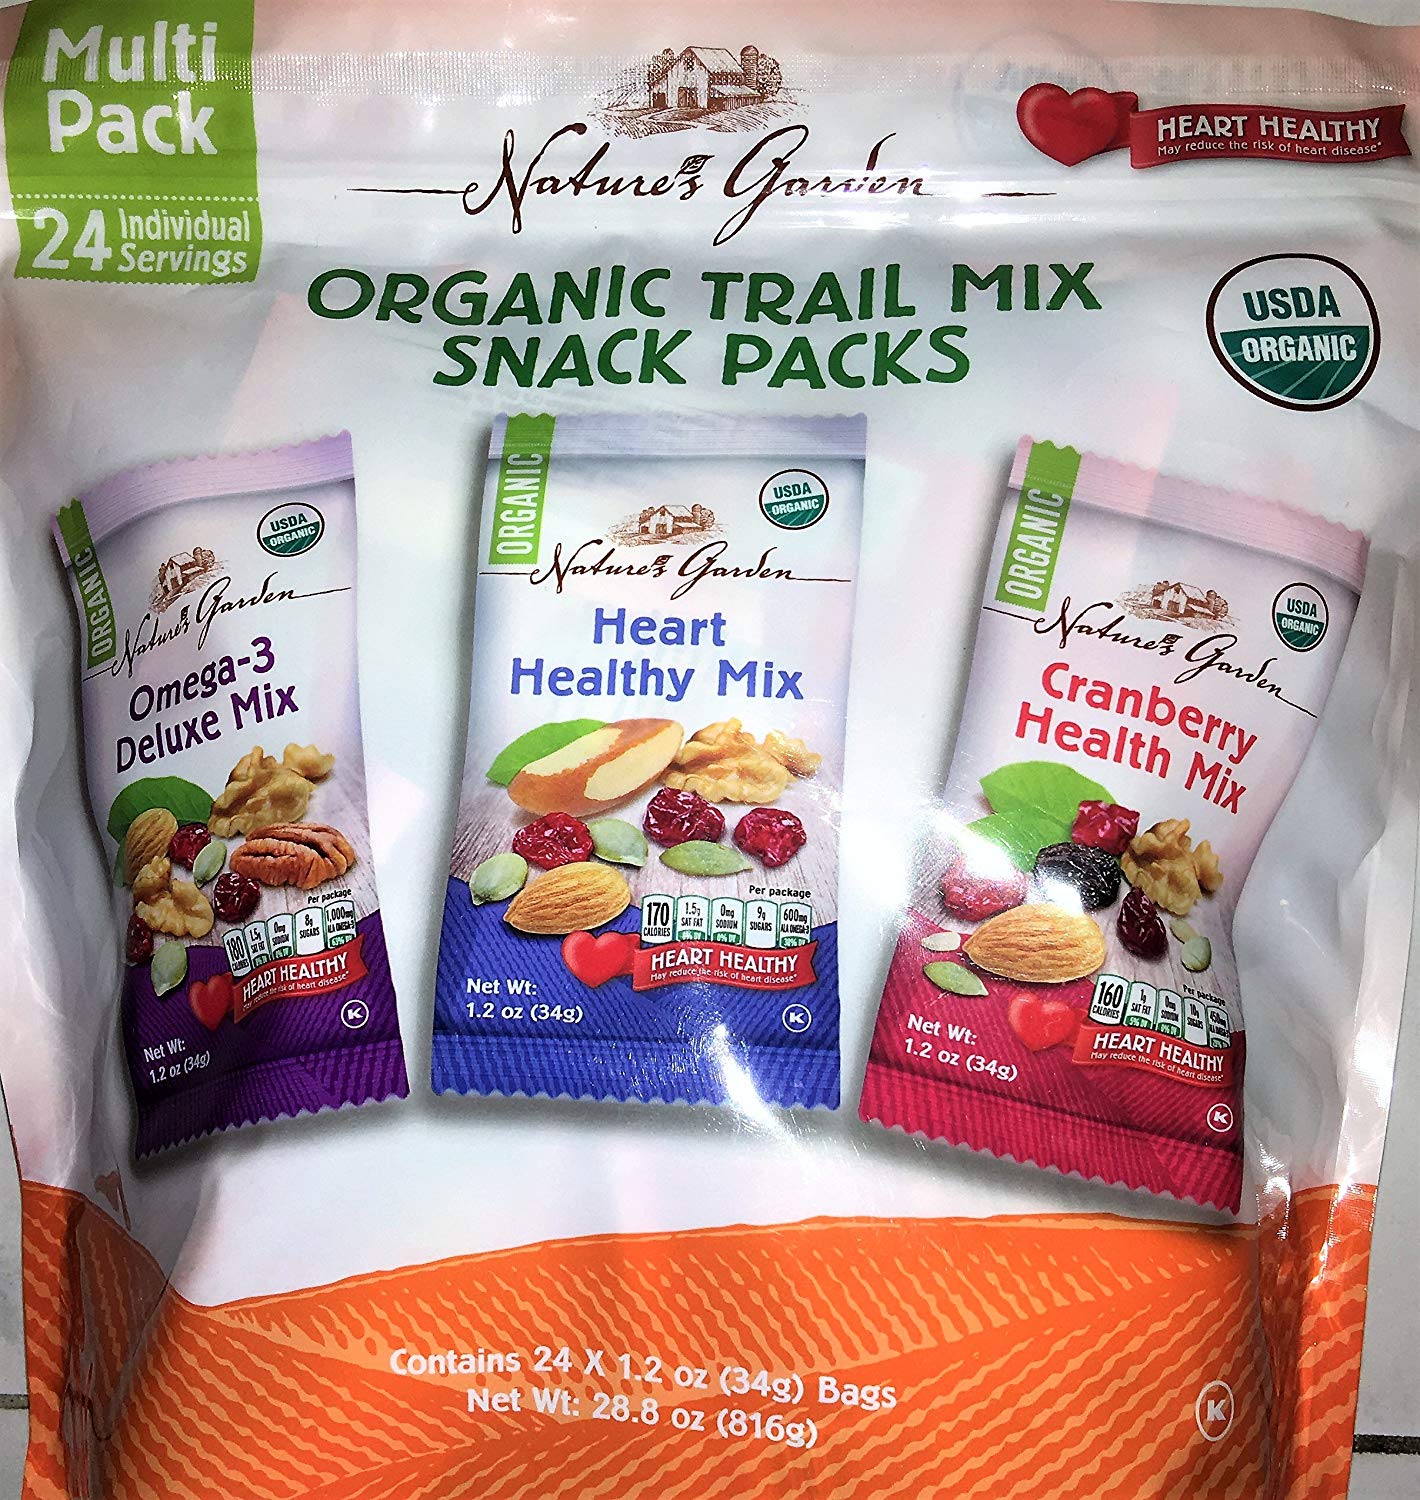 Natures-Garden-Organic-Trail-Mix-Snack-Packs